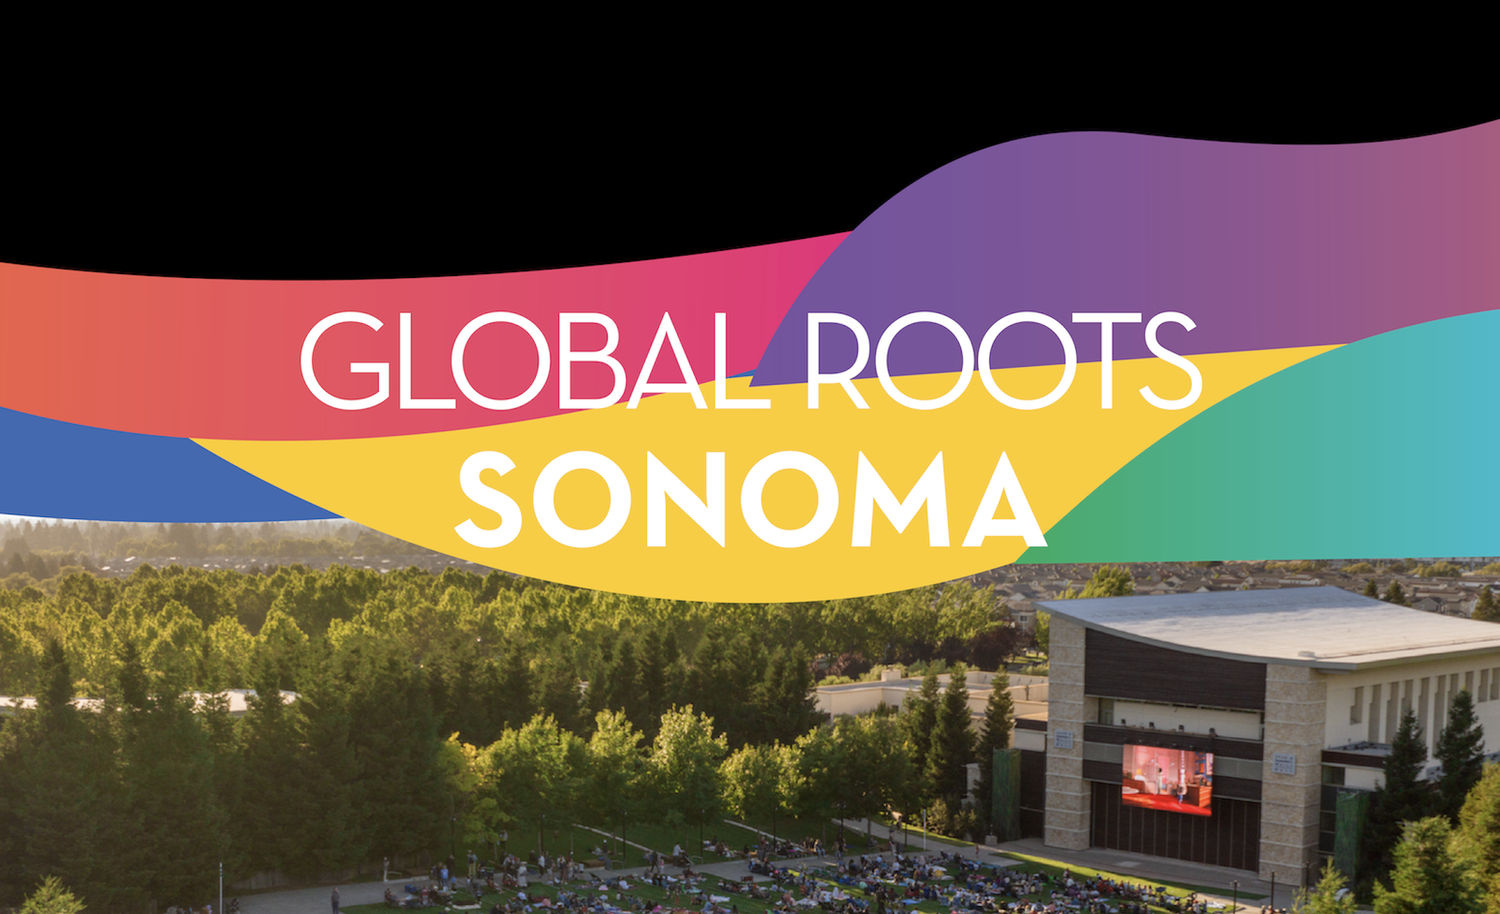 The web flyer for the Global Roots Sonoma event